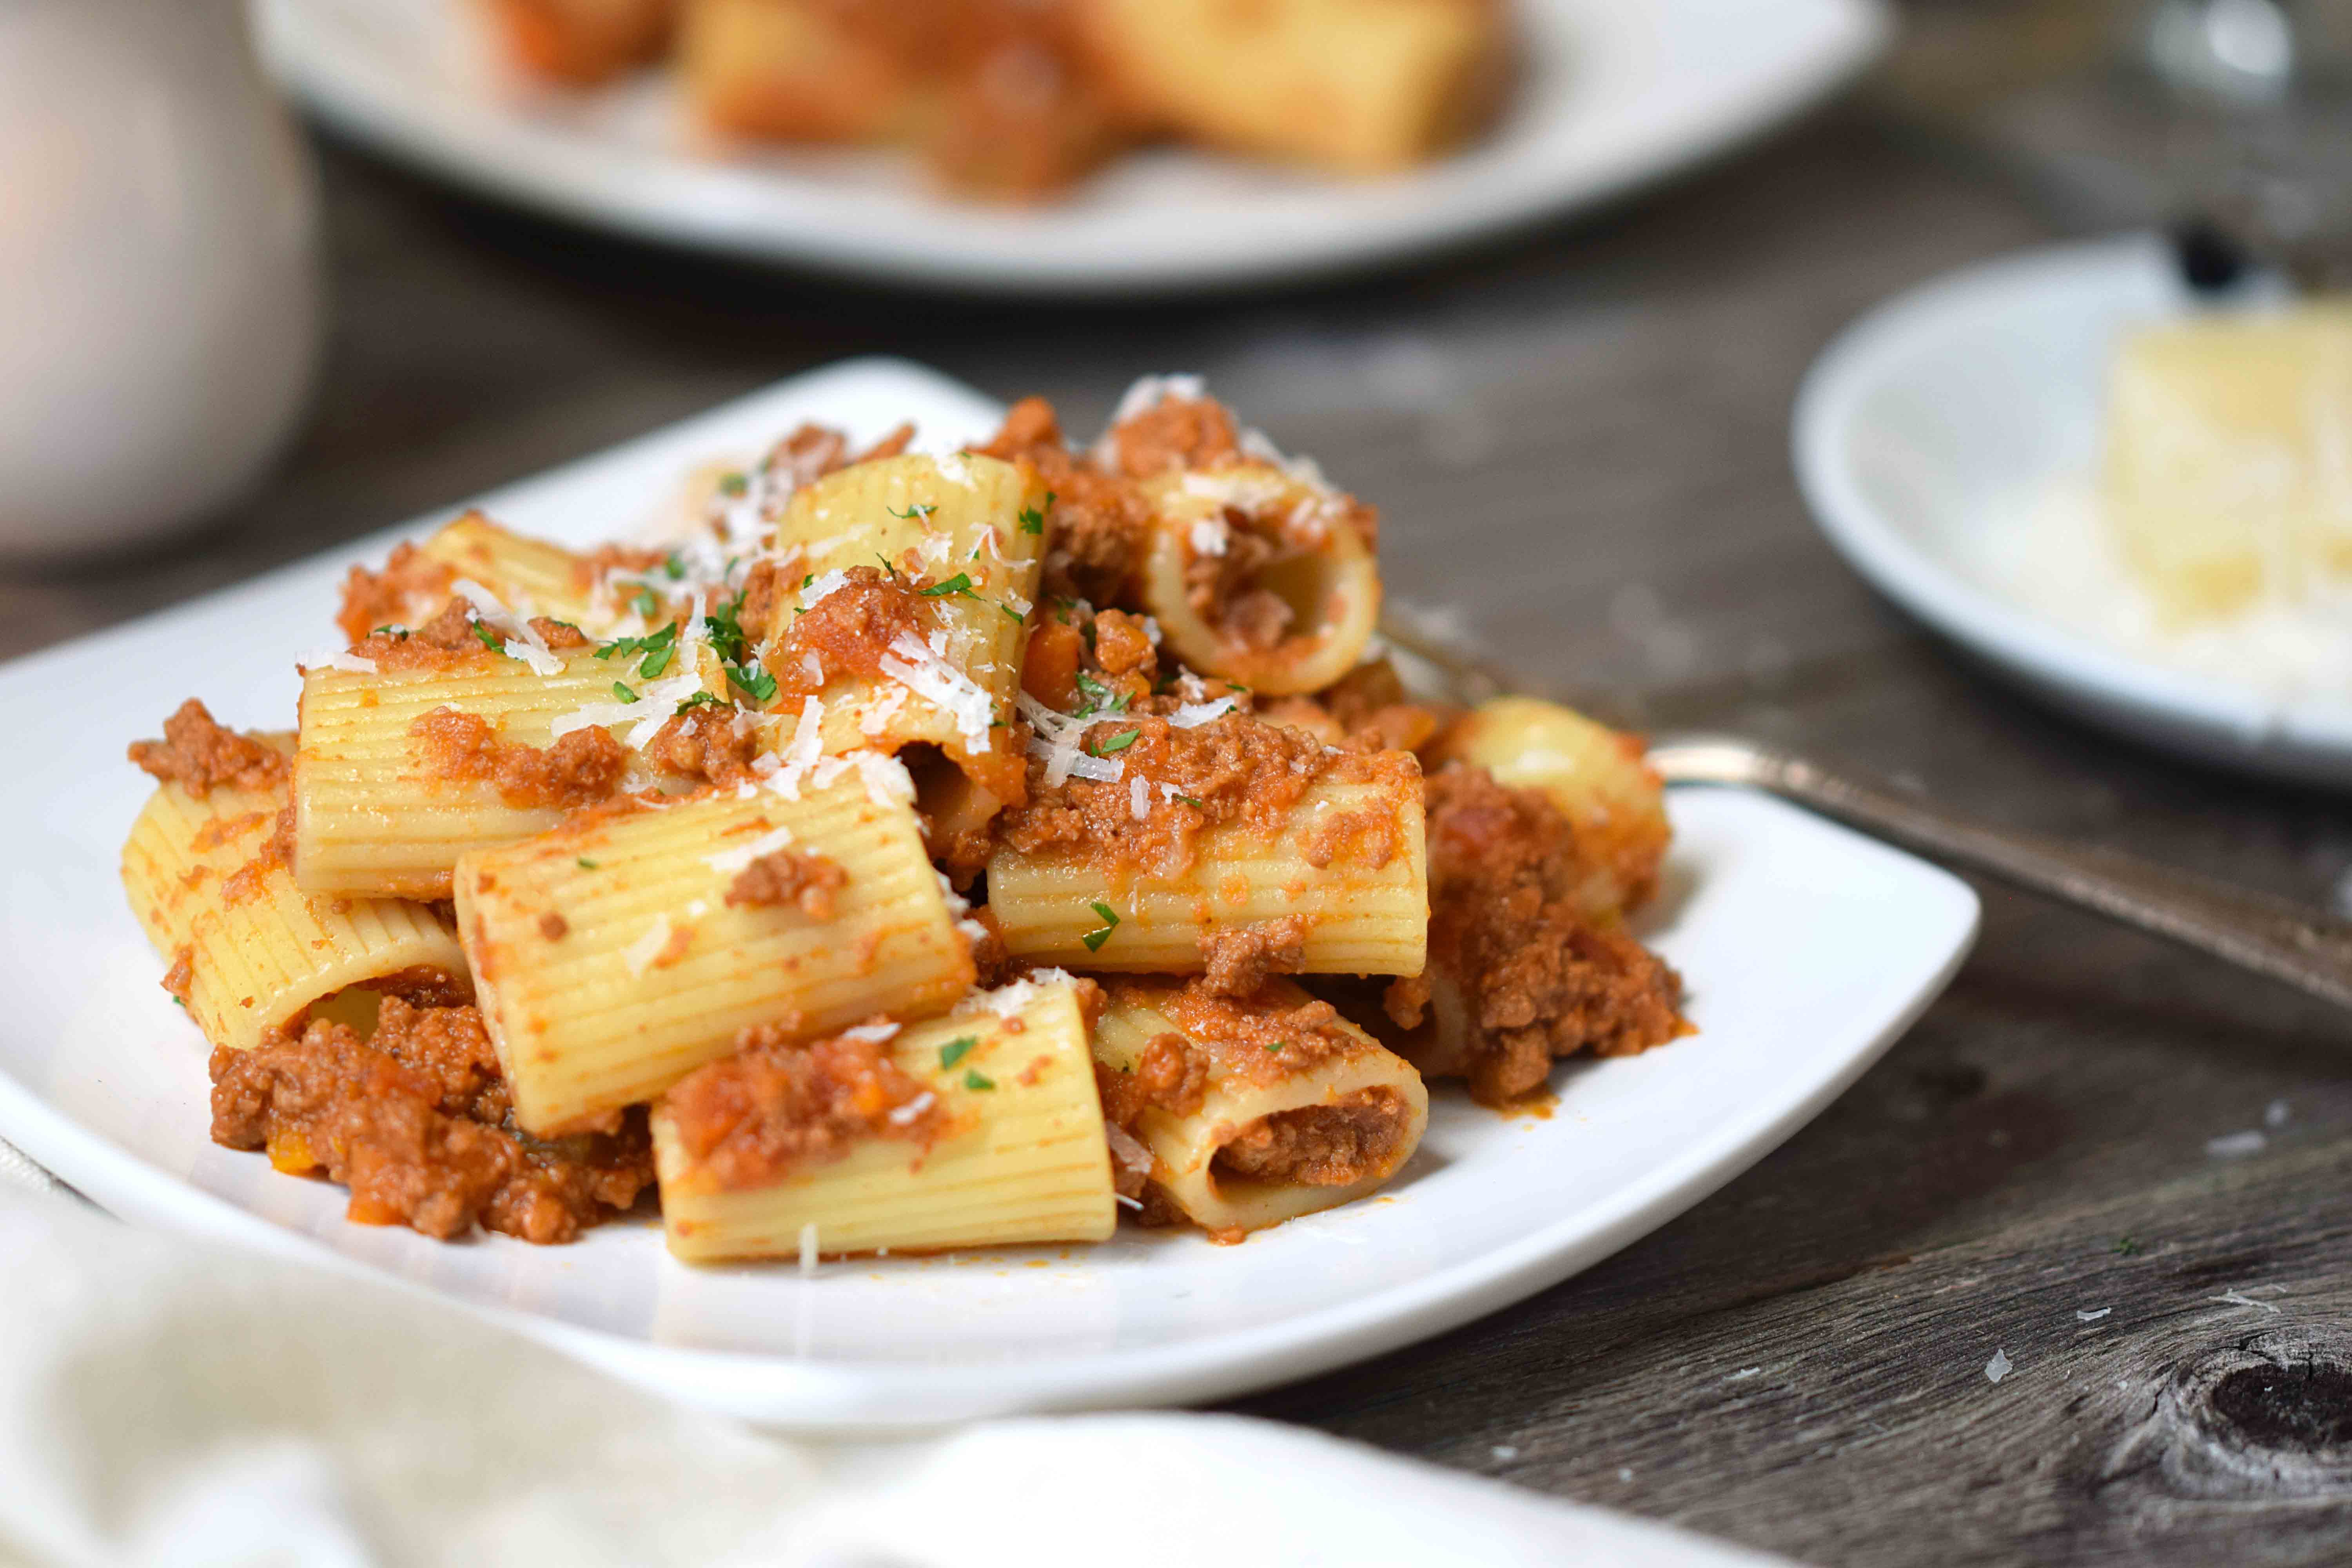 Authentic Bolognese from Scratch